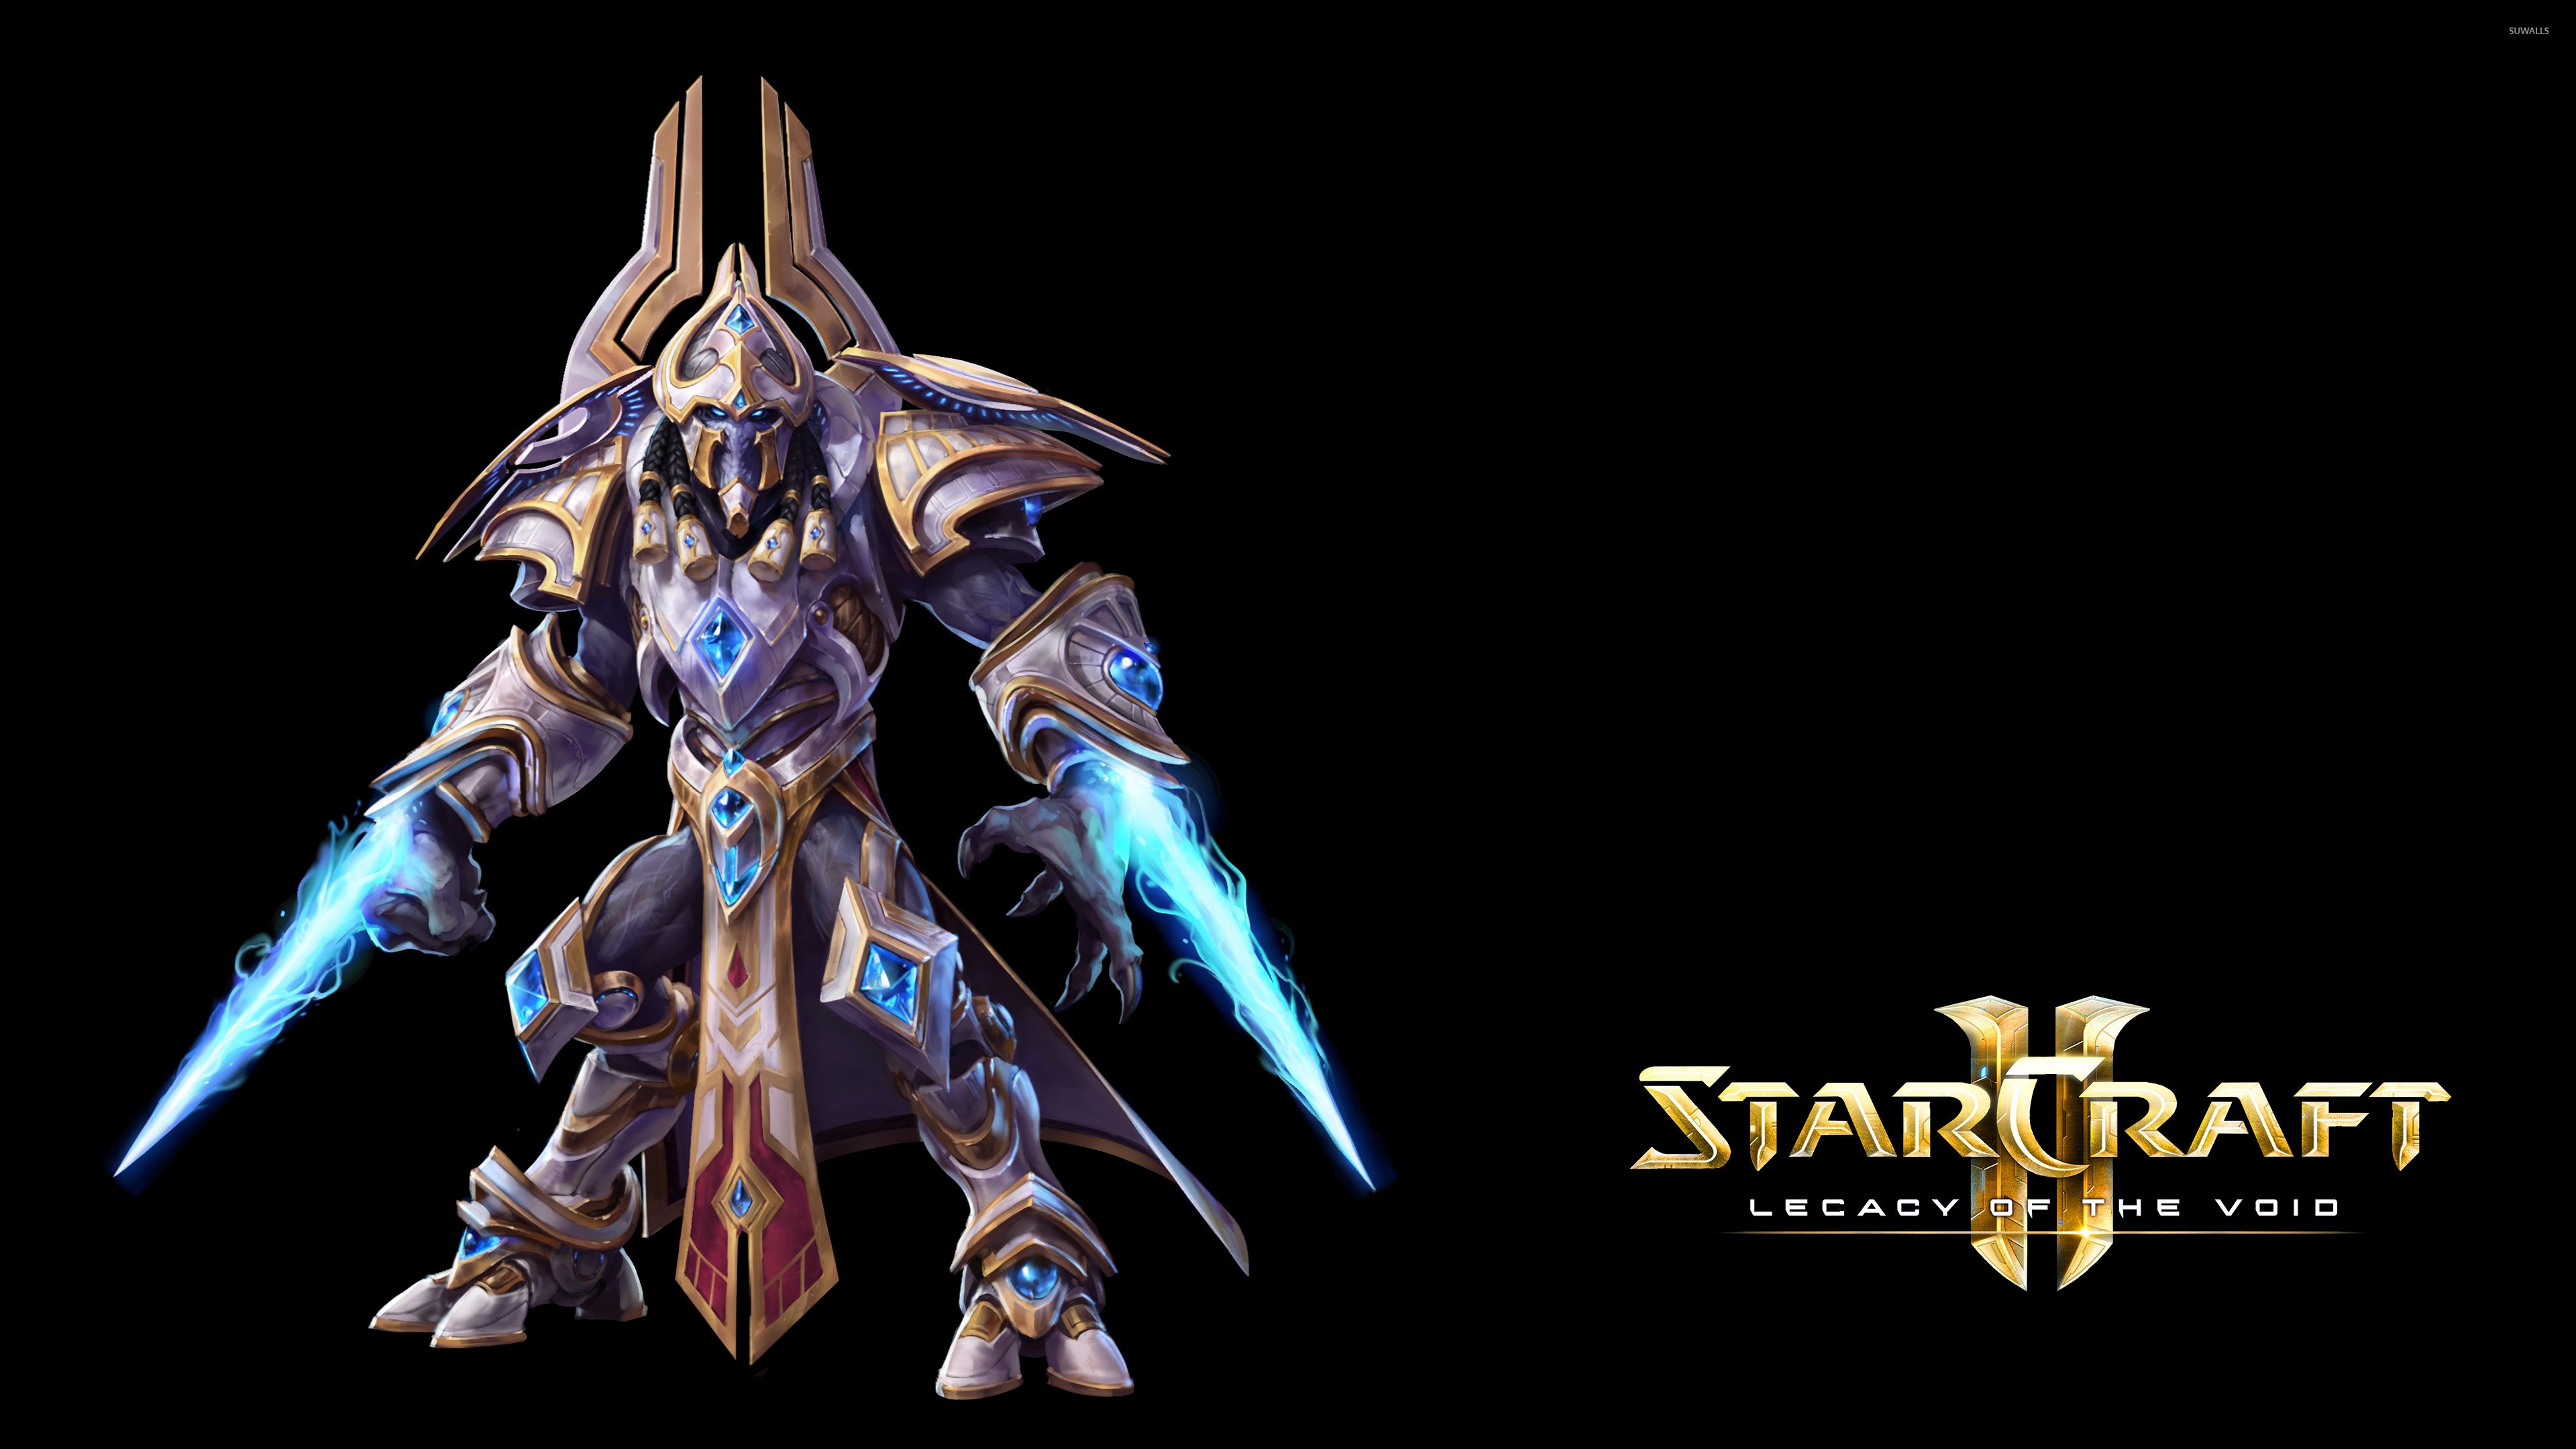 Hierarch Artanis II: Legacy of the Void wallpaper wallpaper